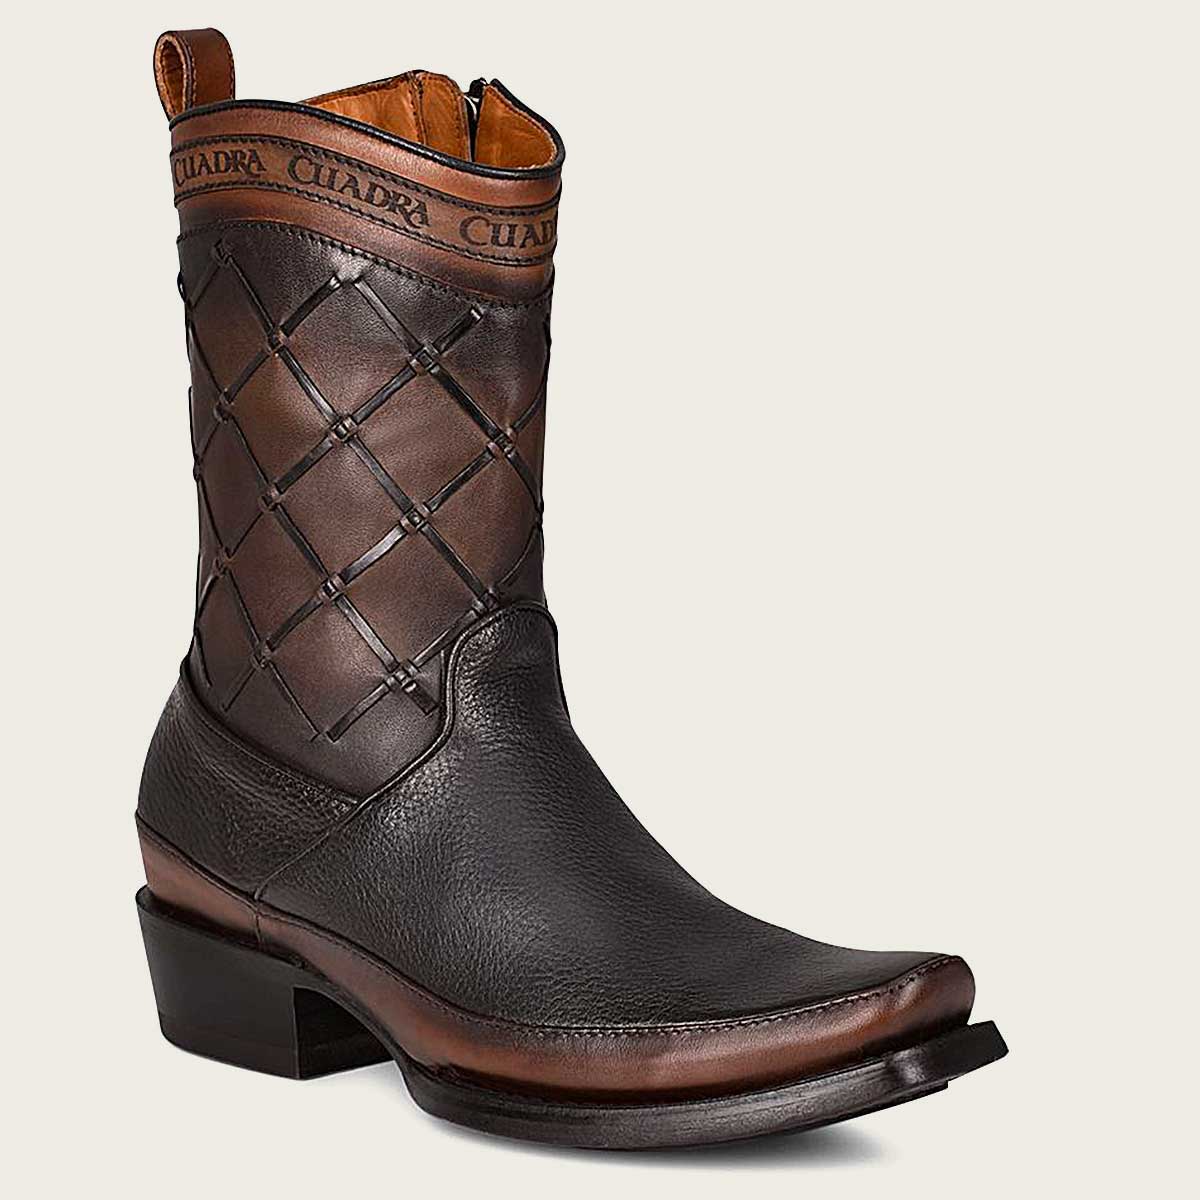 High-quality men's leather boots with handmade fabric, geometric motifs, and Cuadra logo in bovine leather